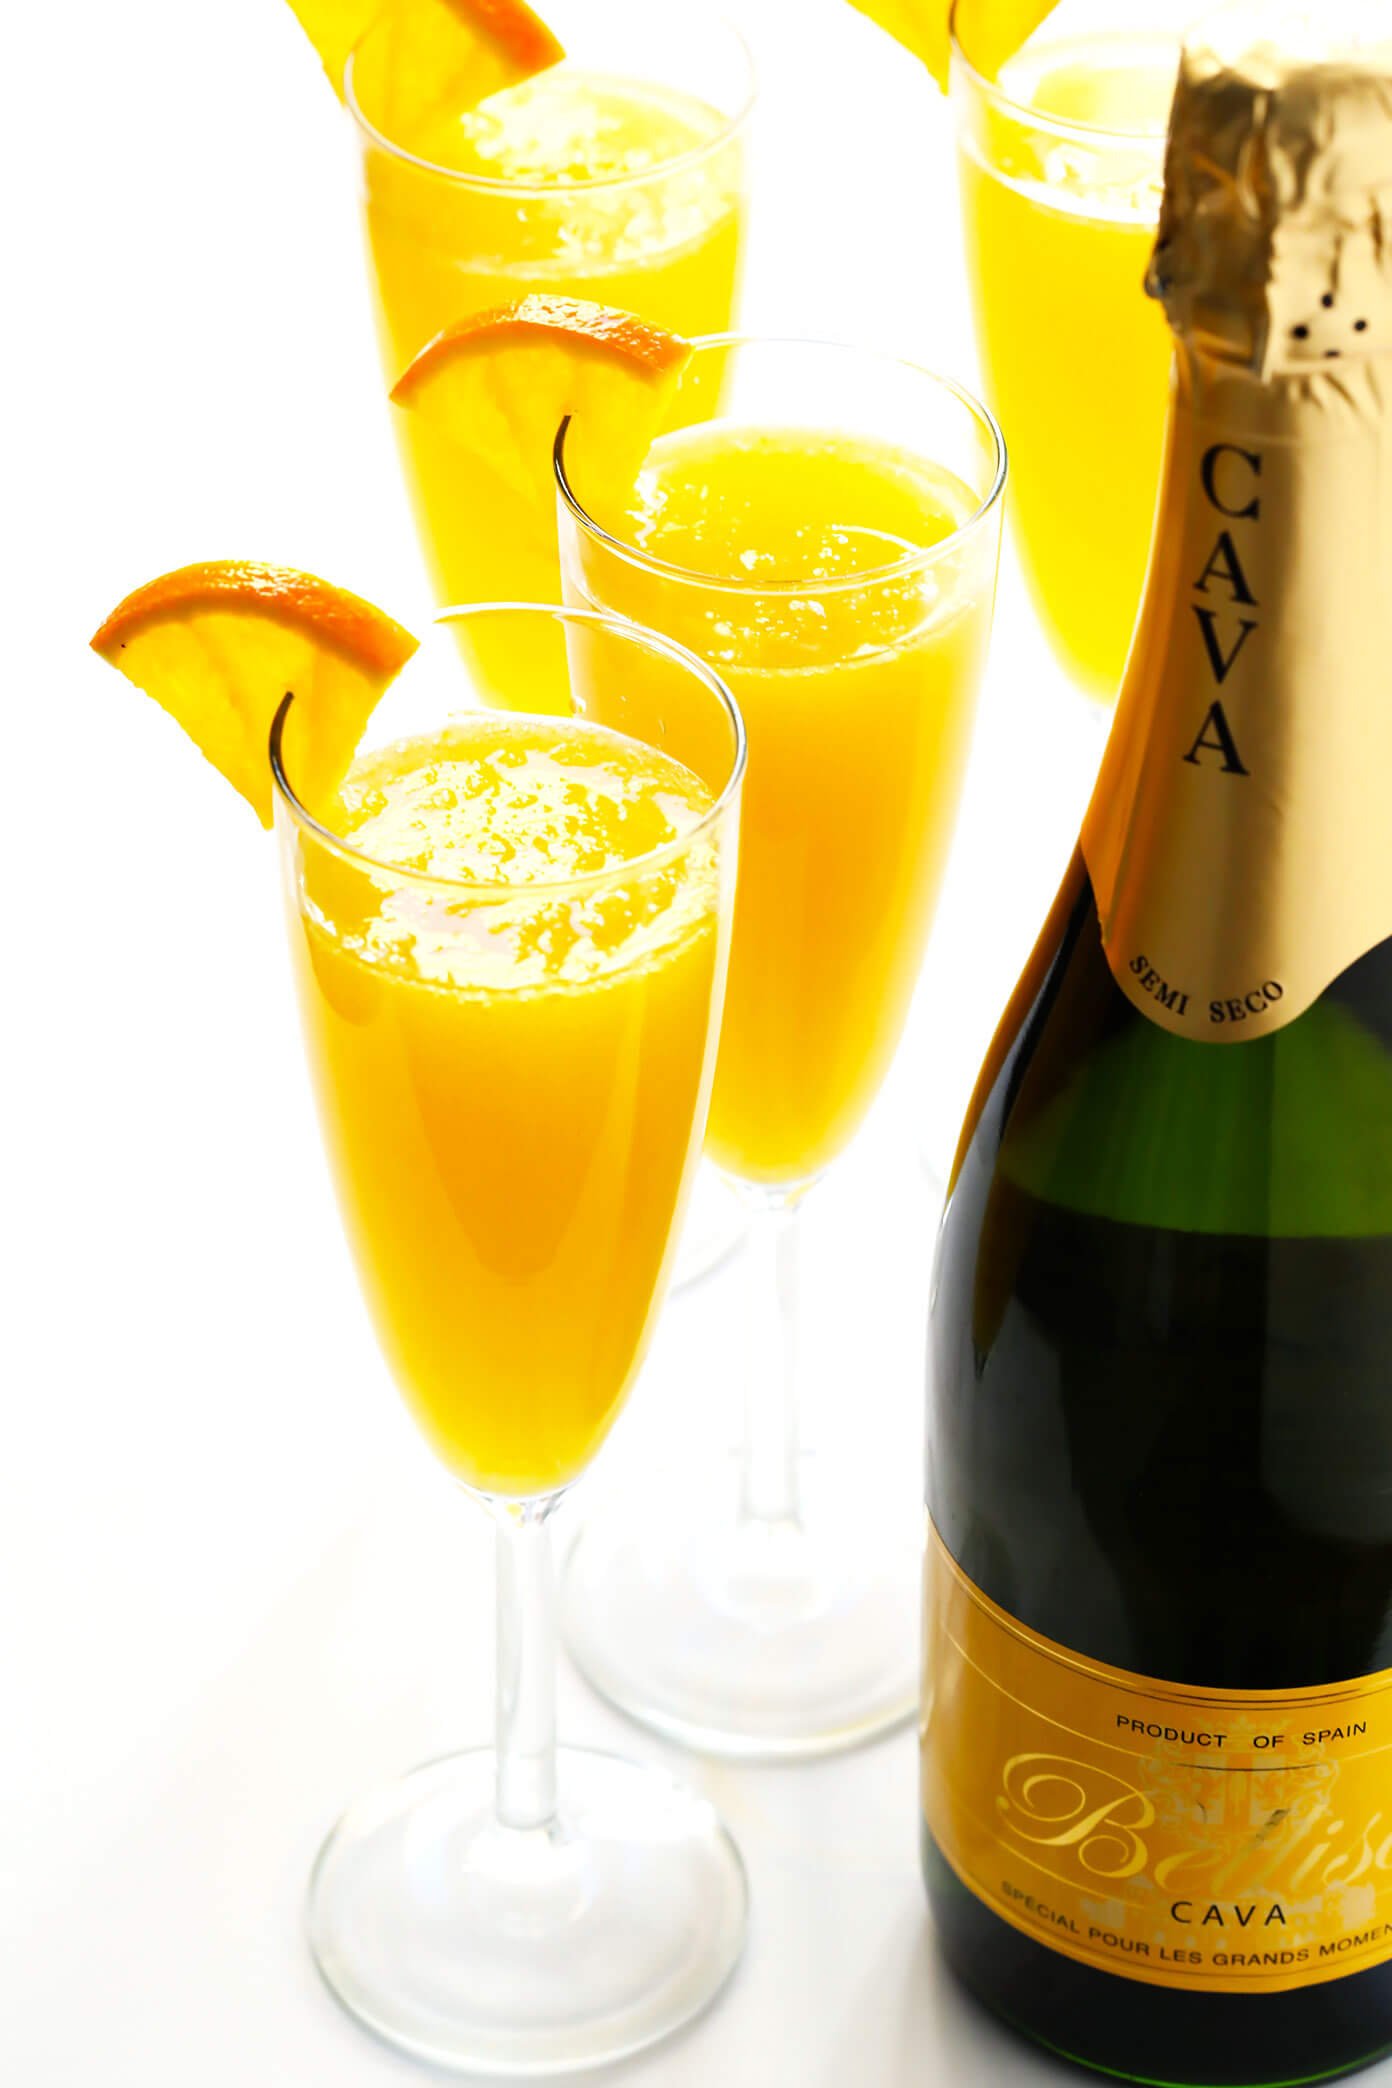 How To Make Mimosas